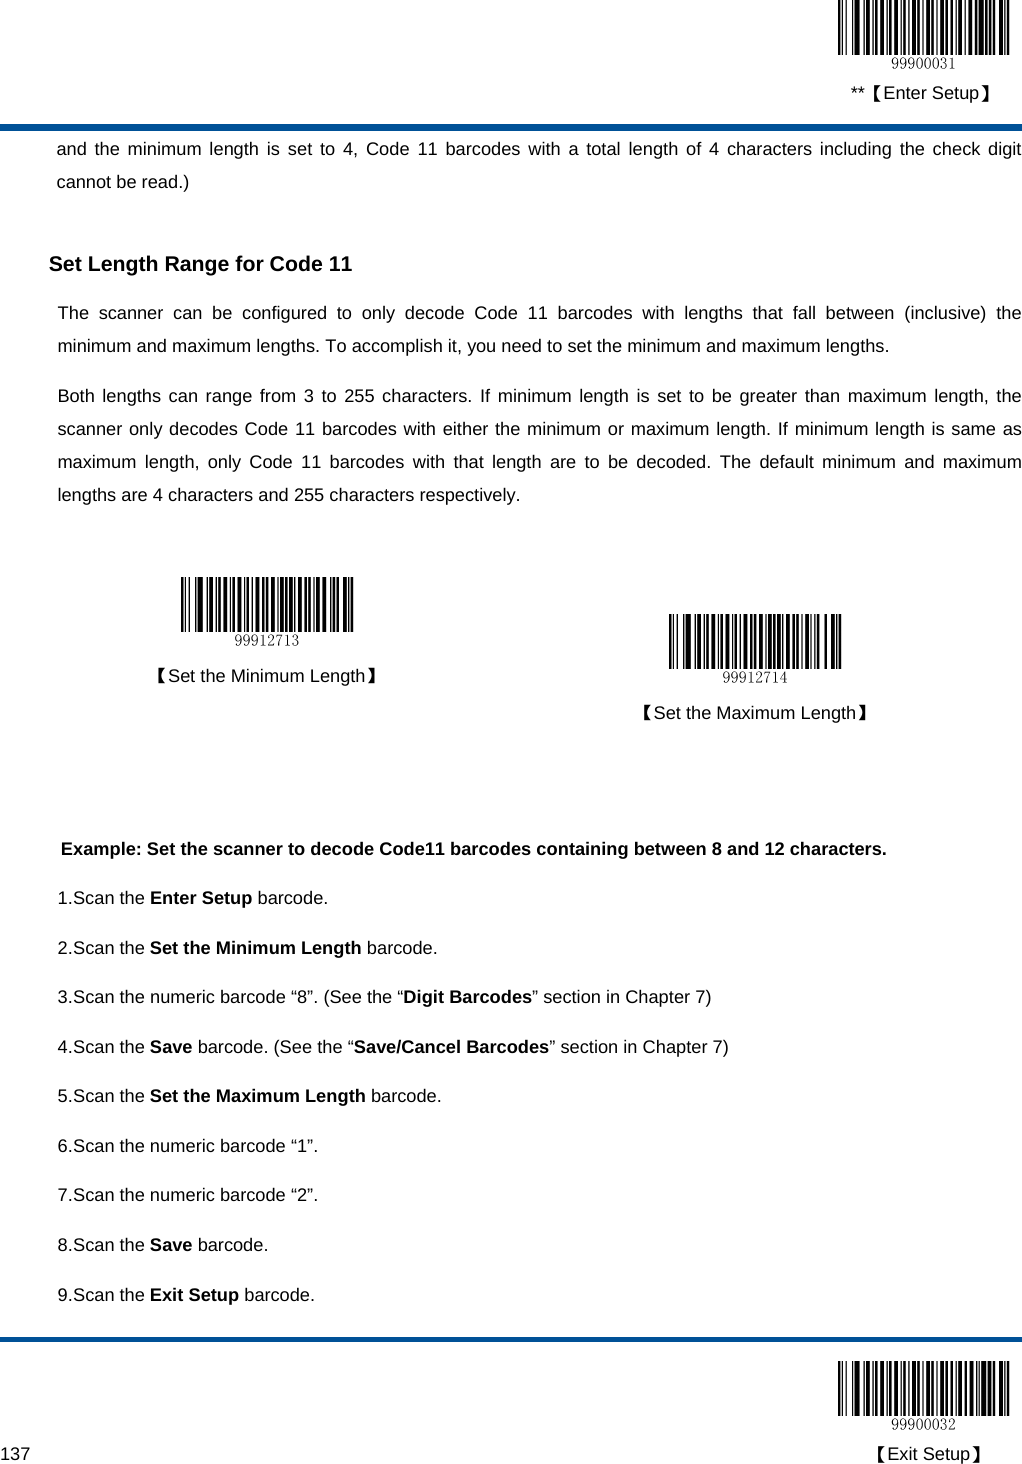  **【Enter Setup】  137                                                                                                                                                                                        【Exit Setup】 and the minimum length is set to 4, Code 11 barcodes with a total length of 4 characters including the check digit cannot be read.)  Set Length Range for Code 11 The scanner can be configured to only decode Code 11 barcodes with lengths that fall between (inclusive) the minimum and maximum lengths. To accomplish it, you need to set the minimum and maximum lengths. Both lengths can range from 3 to 255 characters. If minimum length is set to be greater than maximum length, the scanner only decodes Code 11 barcodes with either the minimum or maximum length. If minimum length is same as maximum length, only Code 11 barcodes with that length are to be decoded. The default minimum and maximum lengths are 4 characters and 255 characters respectively.    【Set the Minimum Length】   【Set the Maximum Length】   Example: Set the scanner to decode Code11 barcodes containing between 8 and 12 characters. 1. Scan the Enter Setup barcode. 2. Scan the Set the Minimum Length barcode. 3. Scan the numeric barcode “8”. (See the “Digit Barcodes” section in Chapter 7) 4. Scan the Save barcode. (See the “Save/Cancel Barcodes” section in Chapter 7) 5. Scan the Set the Maximum Length barcode. 6. Scan the numeric barcode “1”.  7. Scan the numeric barcode “2”.  8. Scan the Save barcode. 9. Scan the Exit Setup barcode. 